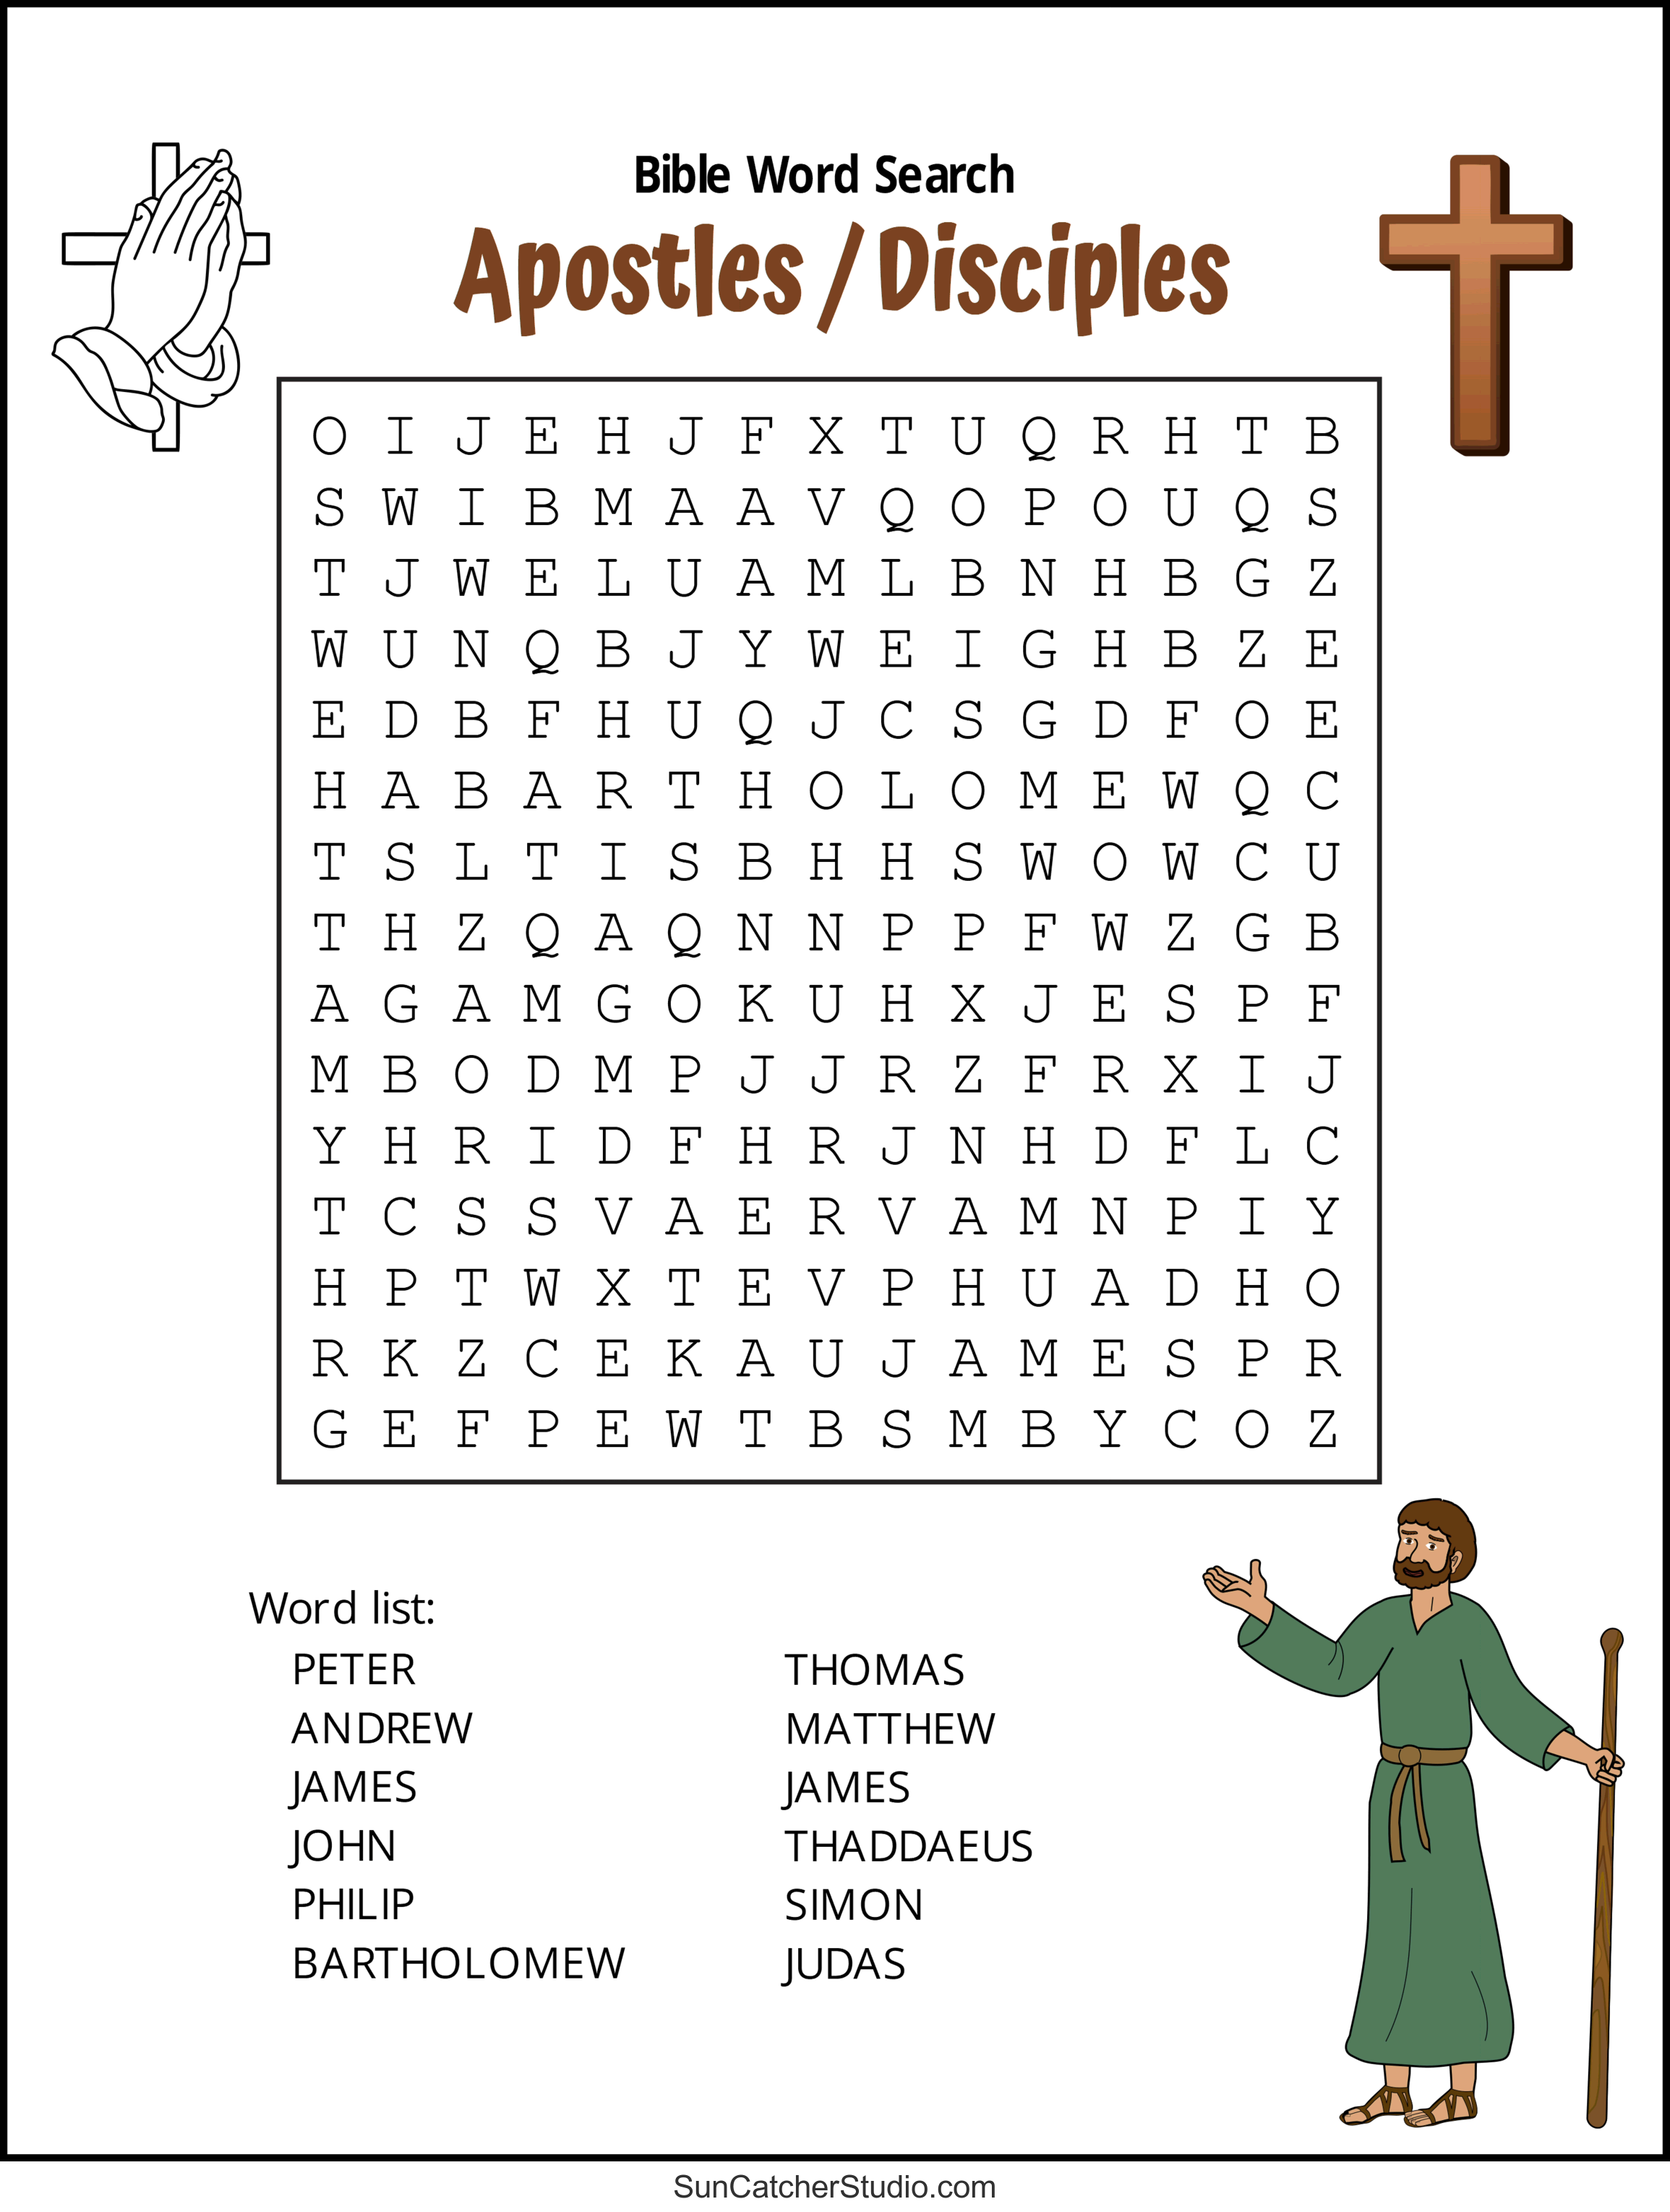 Bible Word Search (Free Printable Christian Puzzles) DIY Projects